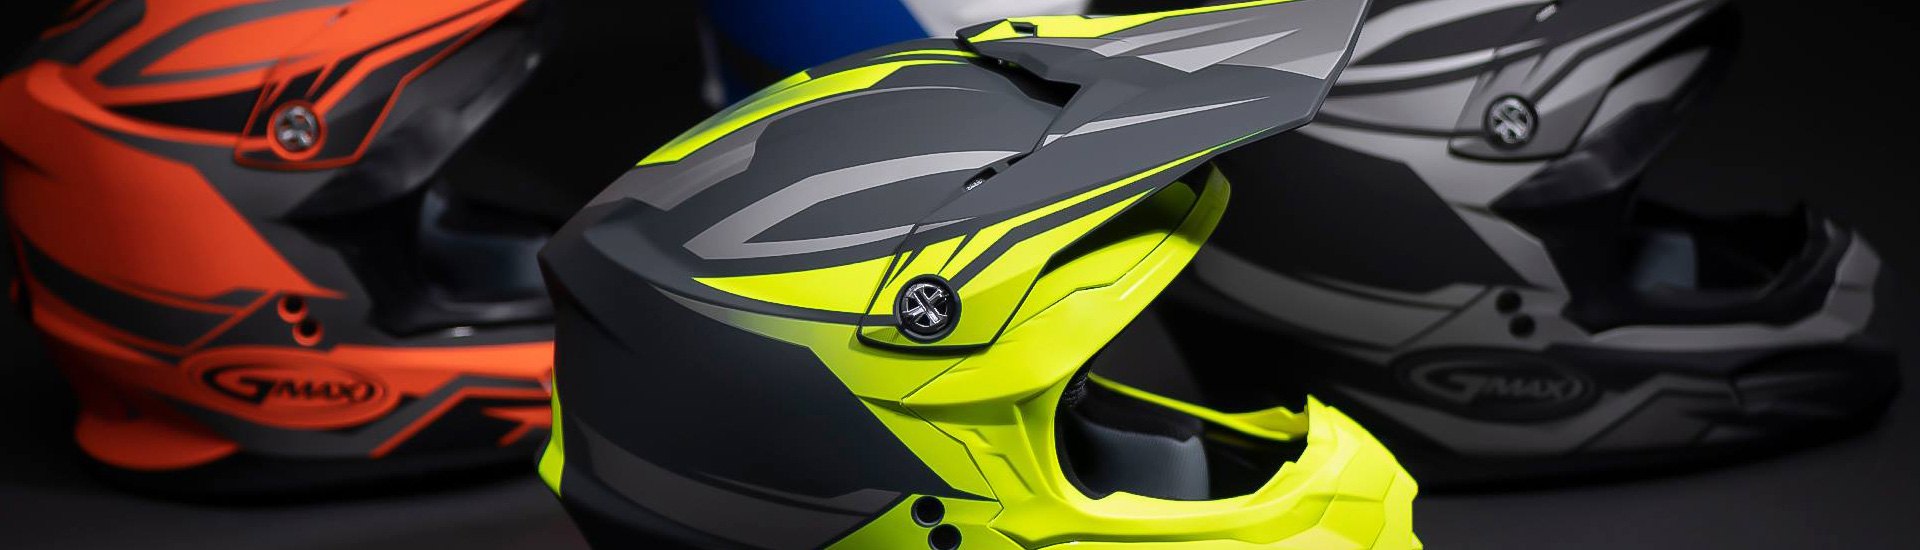 Dual-Sport Bike Helmets | Gloss, Matte, Two-Color, Solid, Special